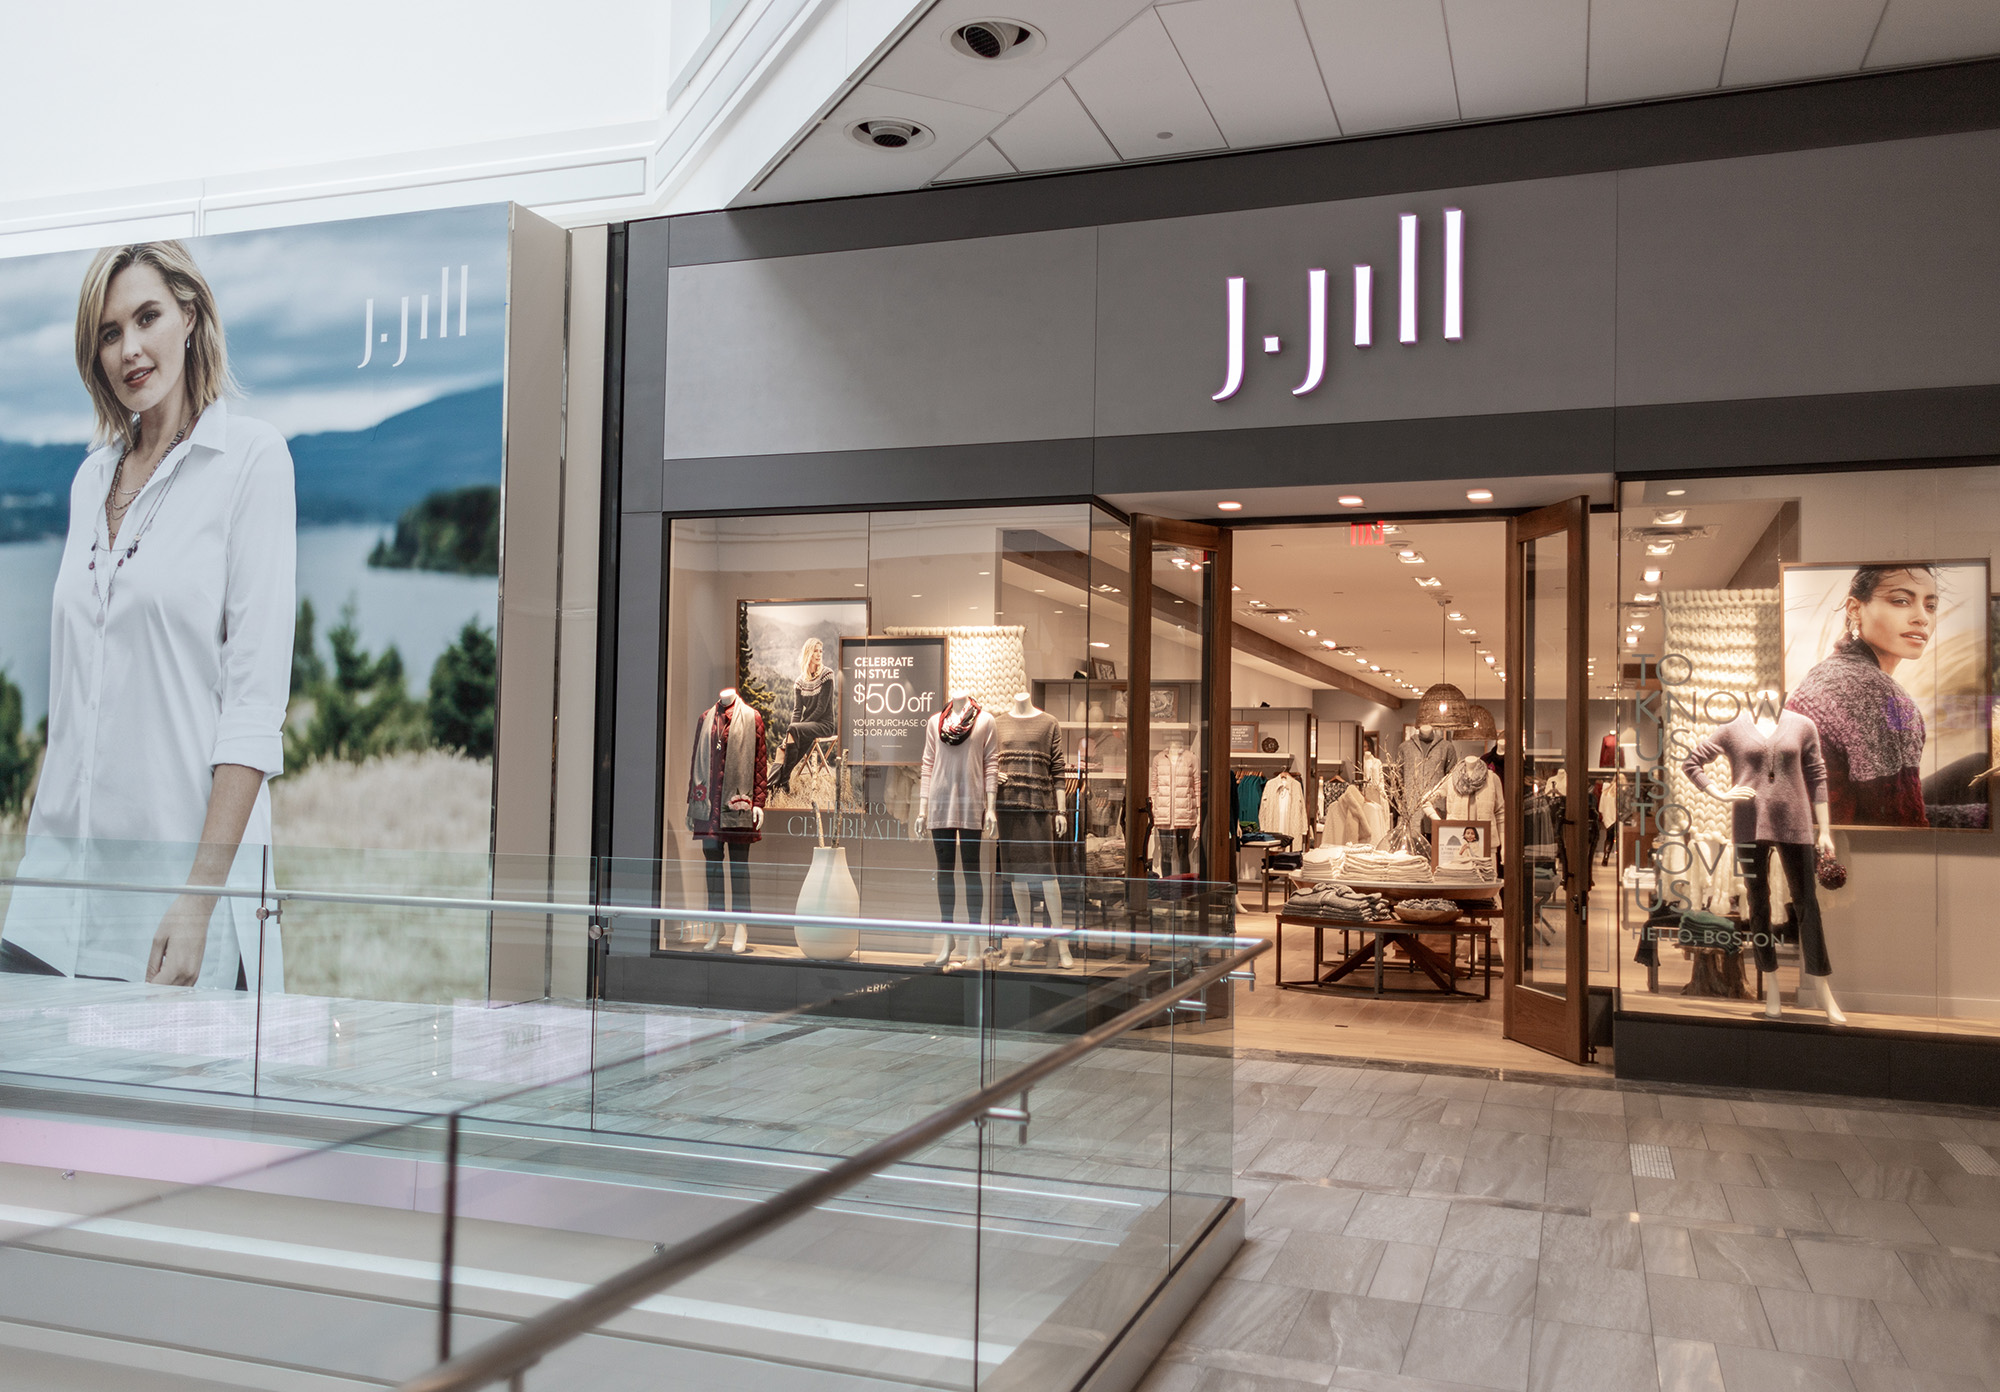 J. Jill (JILL) Struggles to Stay Solvent Three Years After IPO - Bloomberg